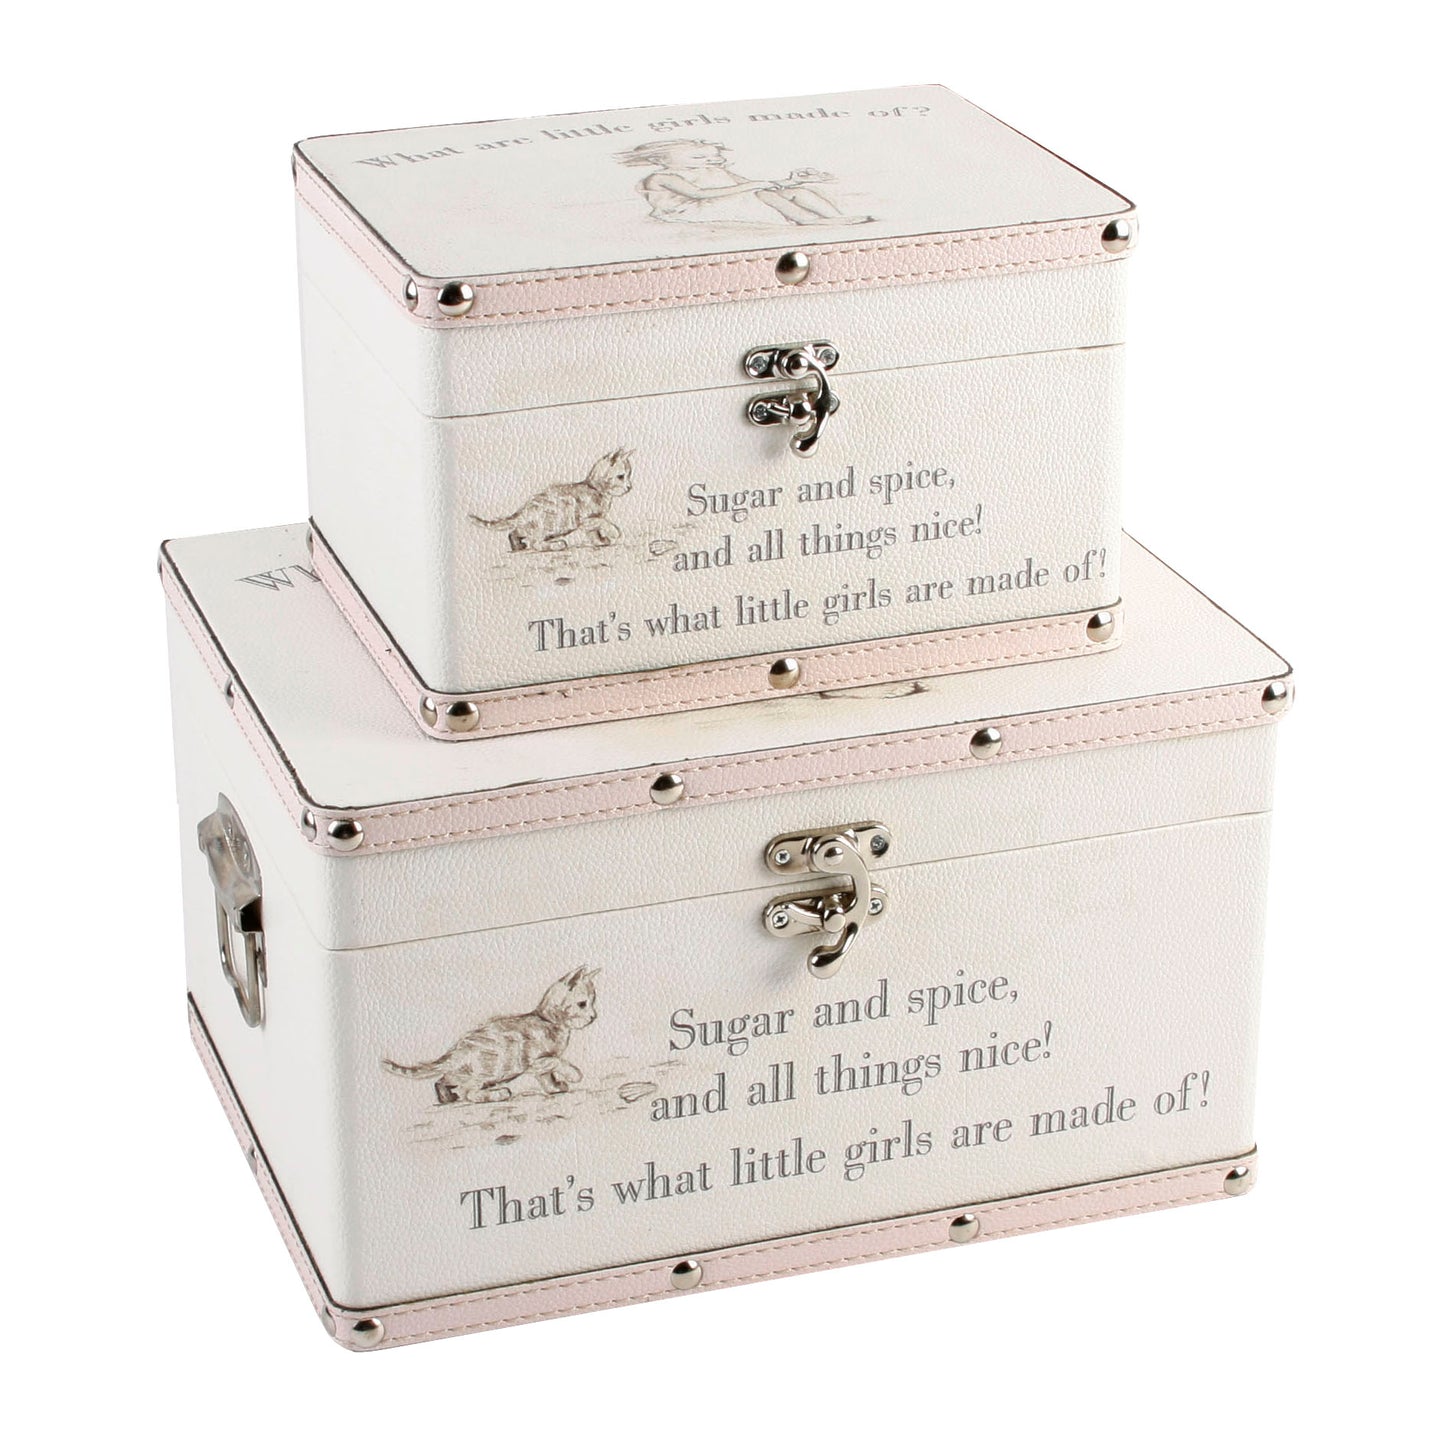 2 Keepsake Boxes, 'What are little girls made of?'